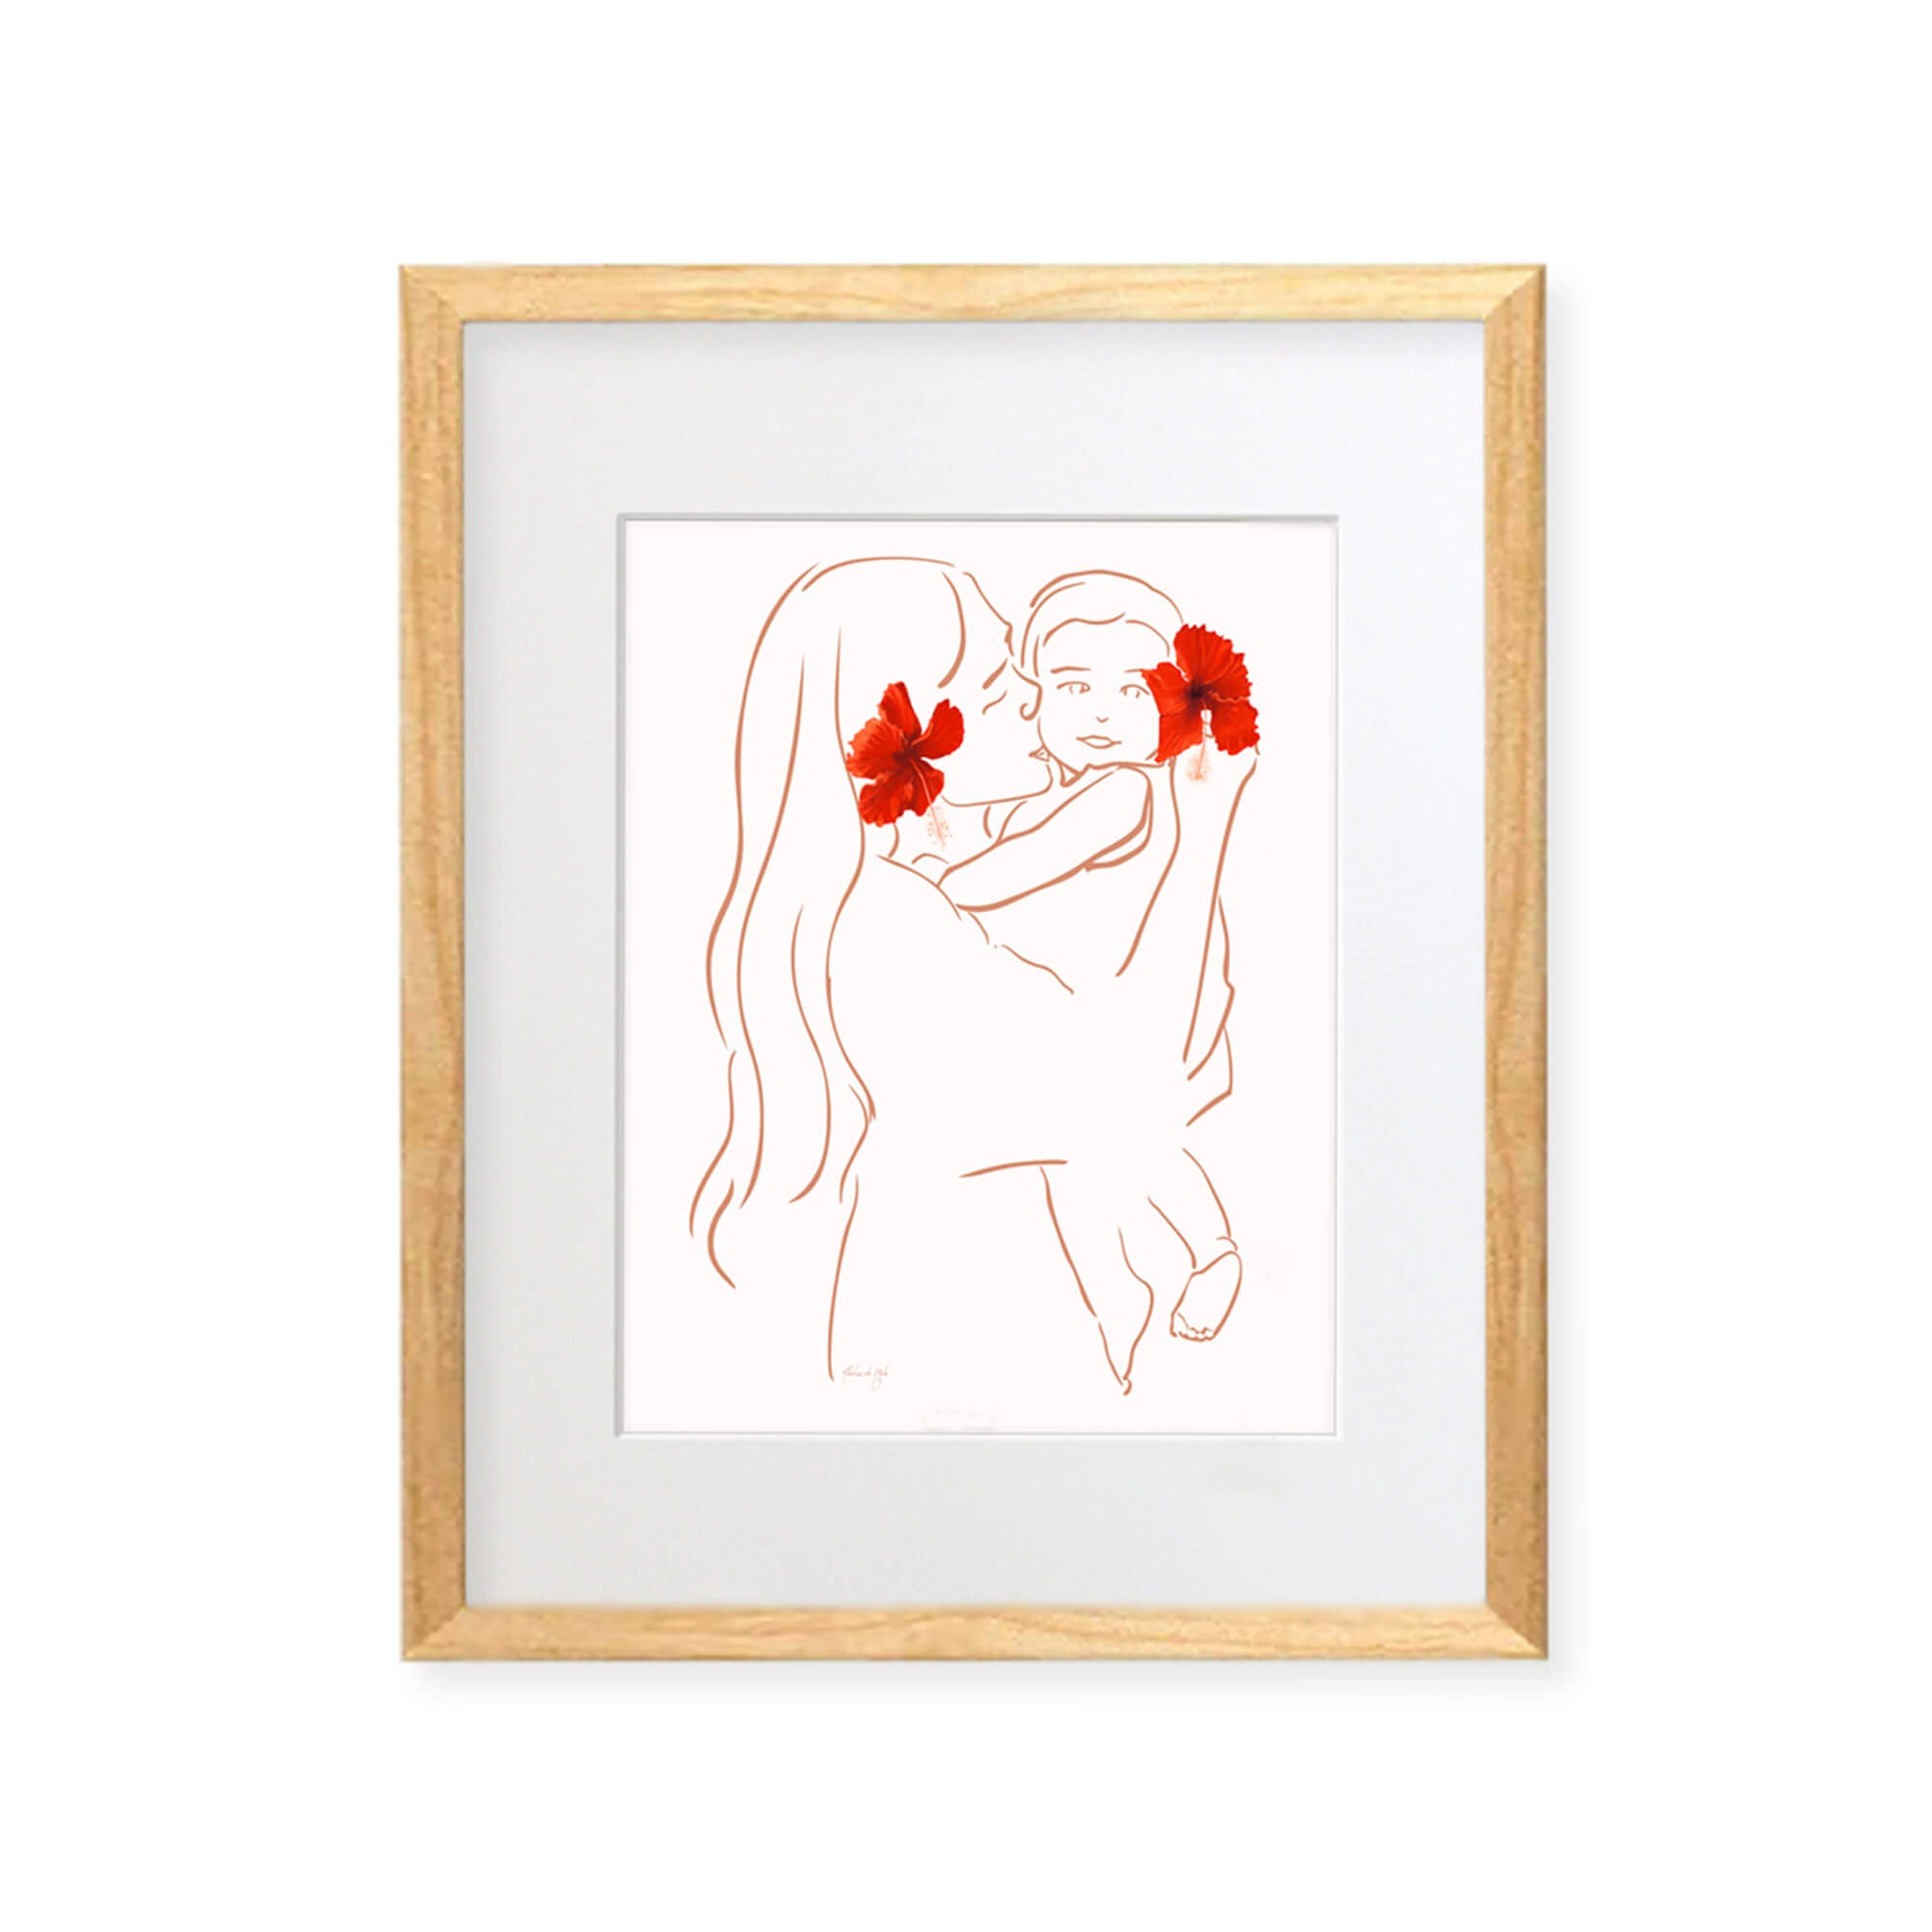 A framed matted art print of Matted art print featuring a mother holding her baby with vibrant red hibiscus flowers by Hawaii artist Aloha De Mele